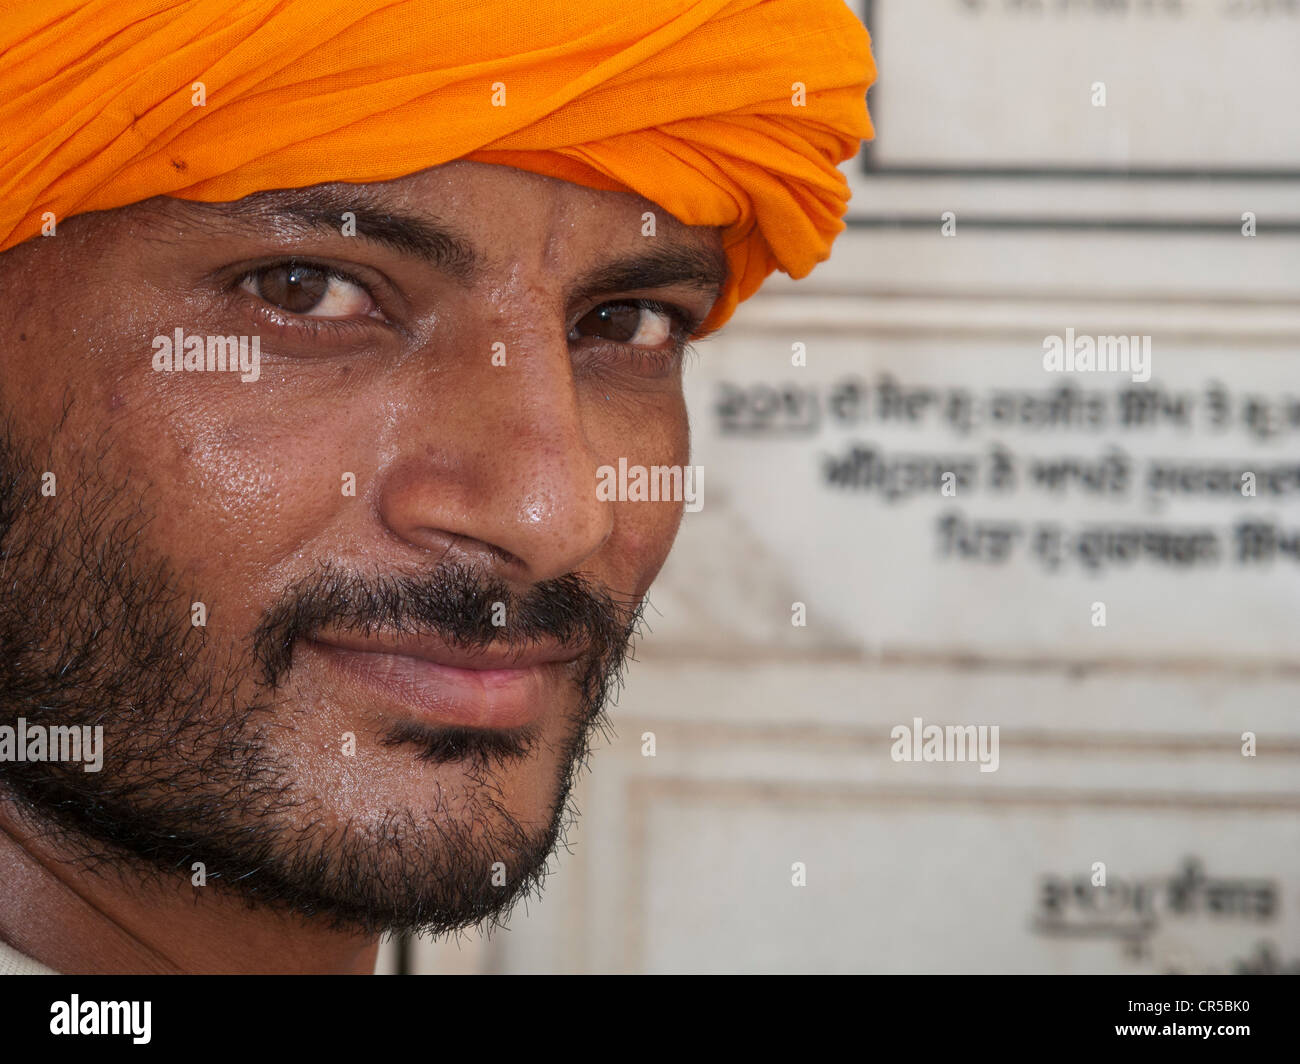 Sikh devotee from New Delhi visiting the Golden Temple, Amritsar, Punjab, India, Asia Stock Photo